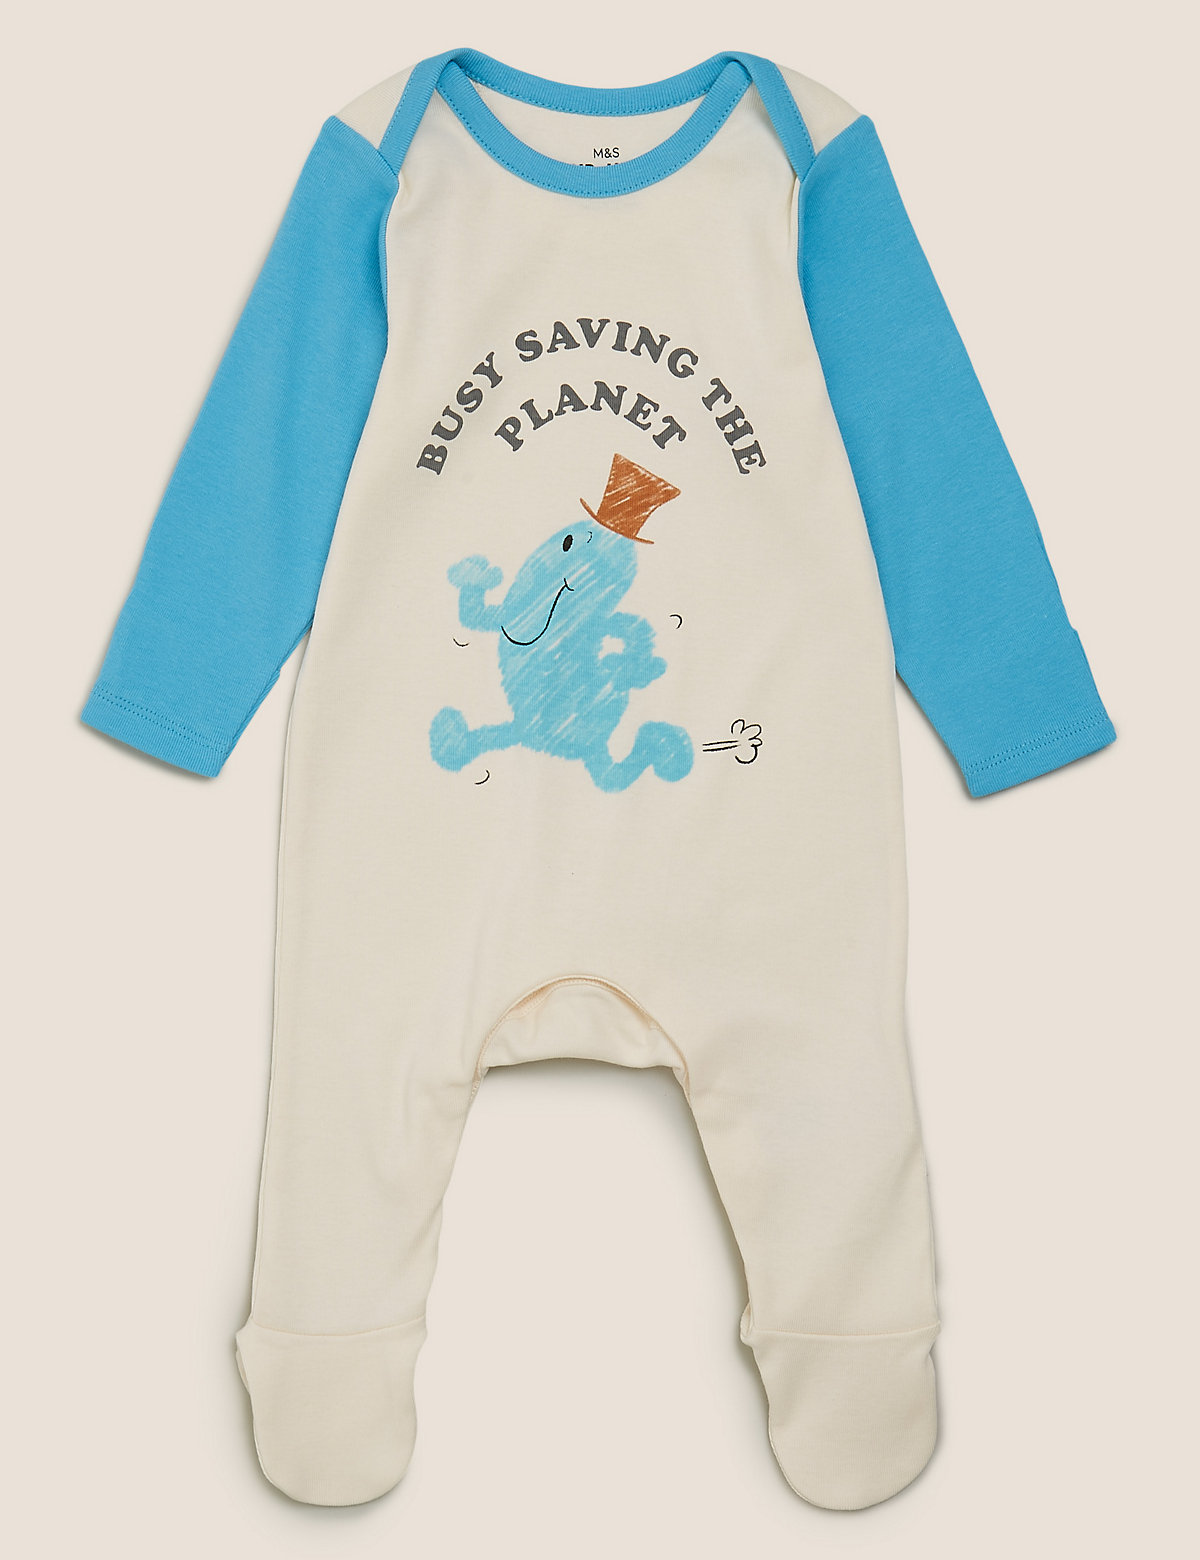 2 Pack Pure Cotton Mr Men™ Sleepsuits (0-3 Yrs)